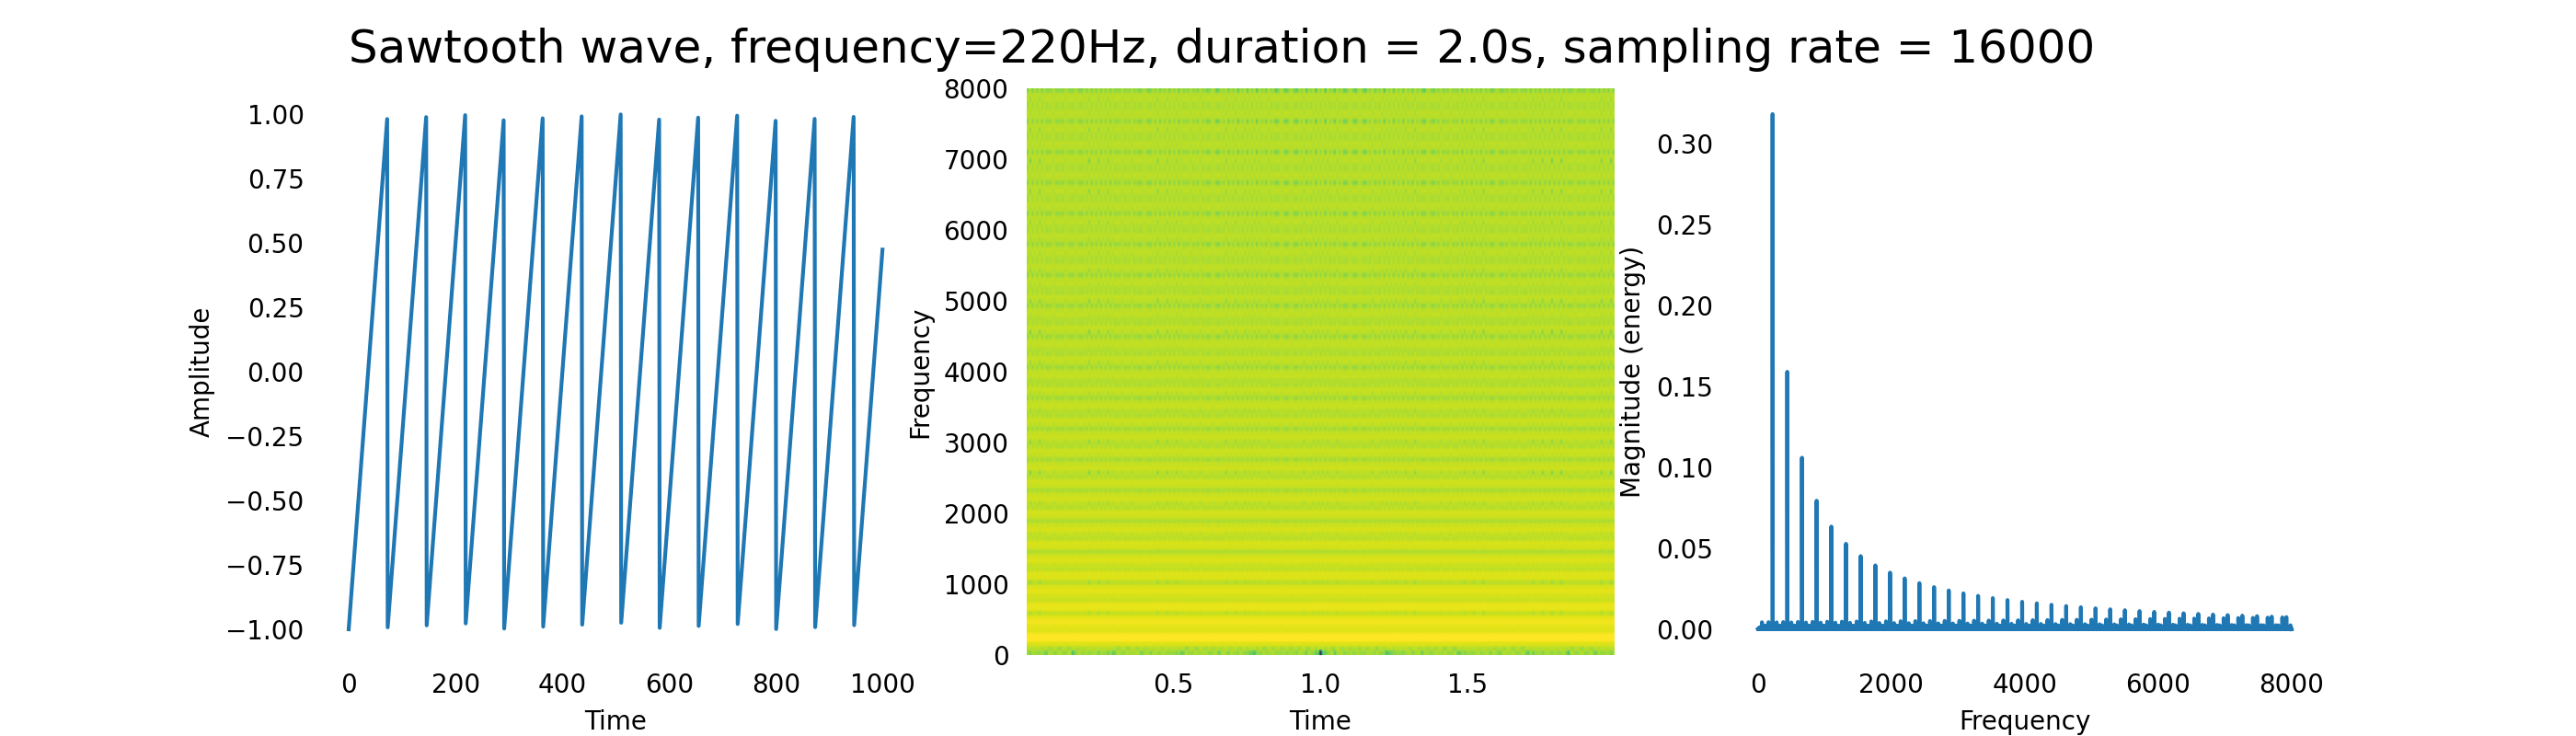 Time-domain, time-frequency and frequency-domain representations of a sawtooth waveform across different frequencies sampled at 16KHz for 2 seconds.